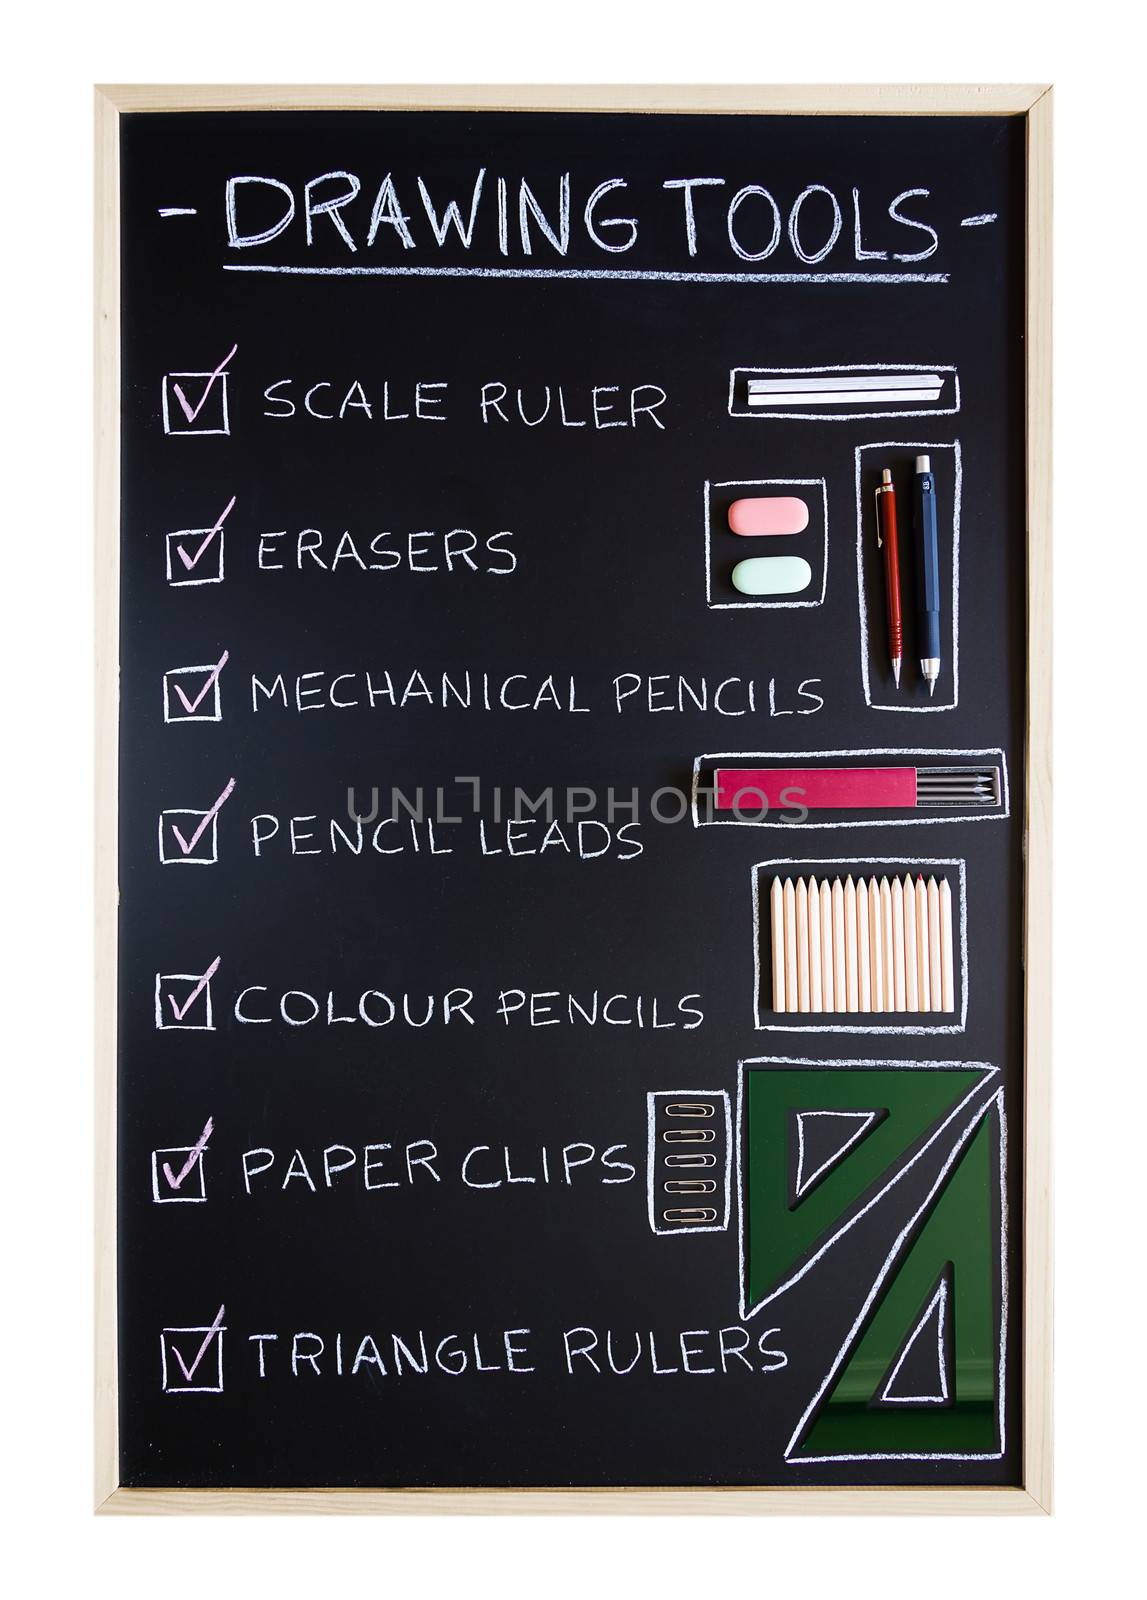 Checklist of drawing tools over blackboard background